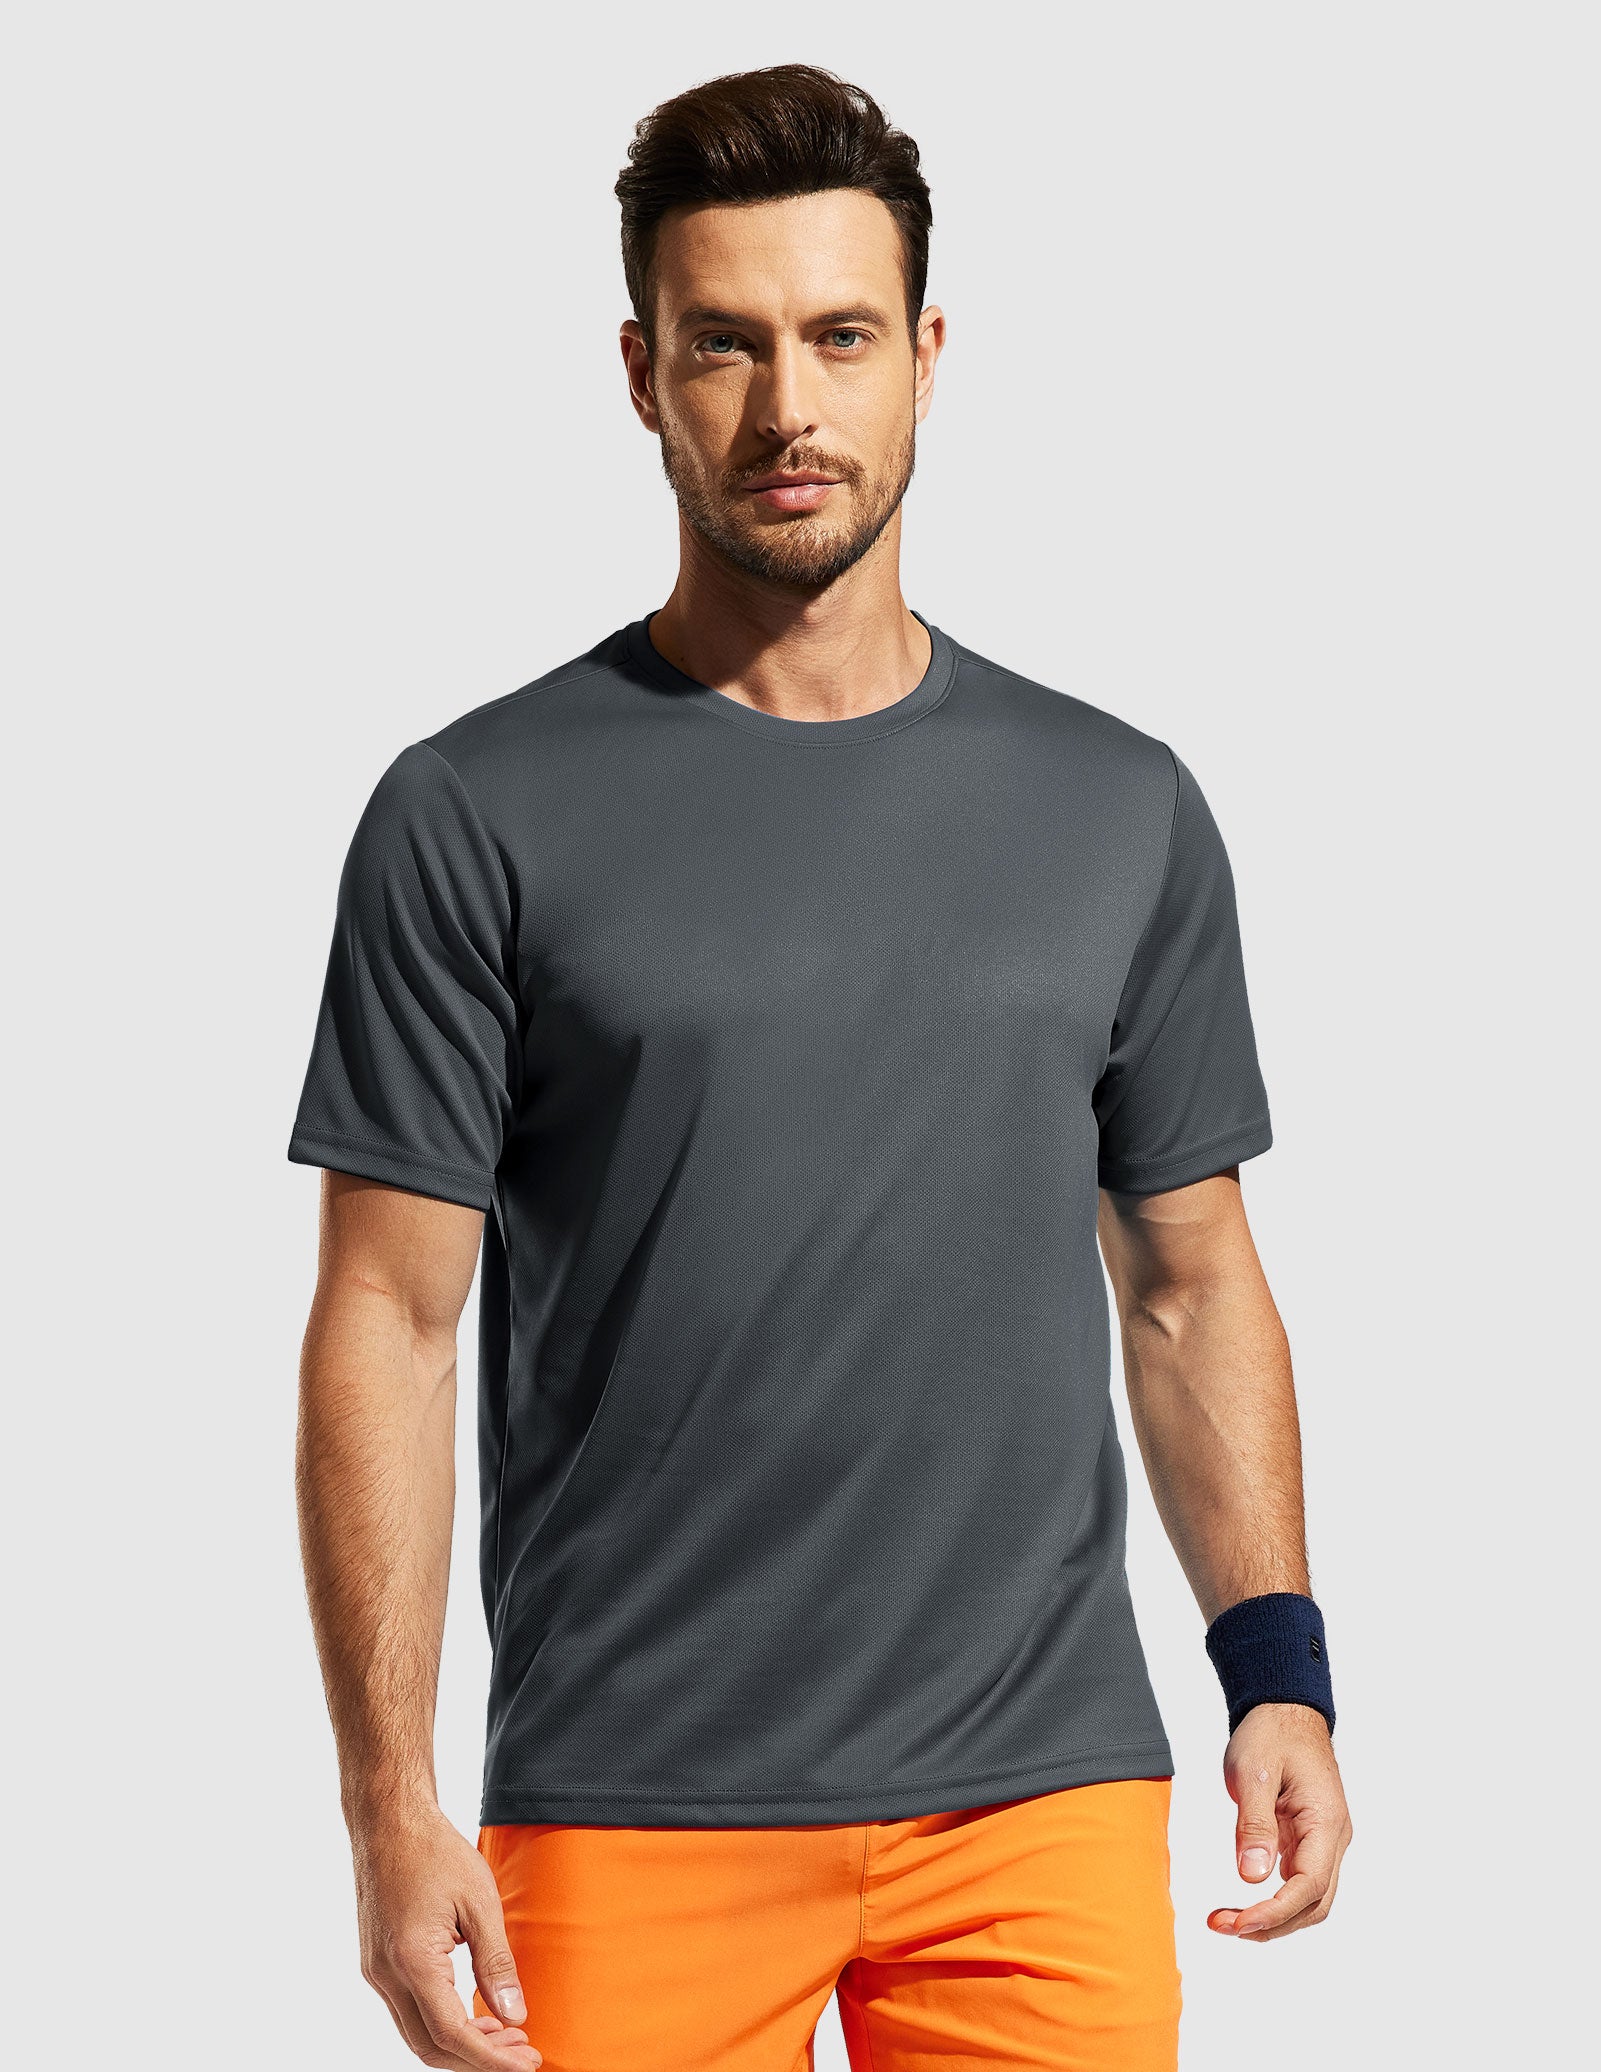 Men's Dry Fit Workout T-shirts for Gym Athletic Running